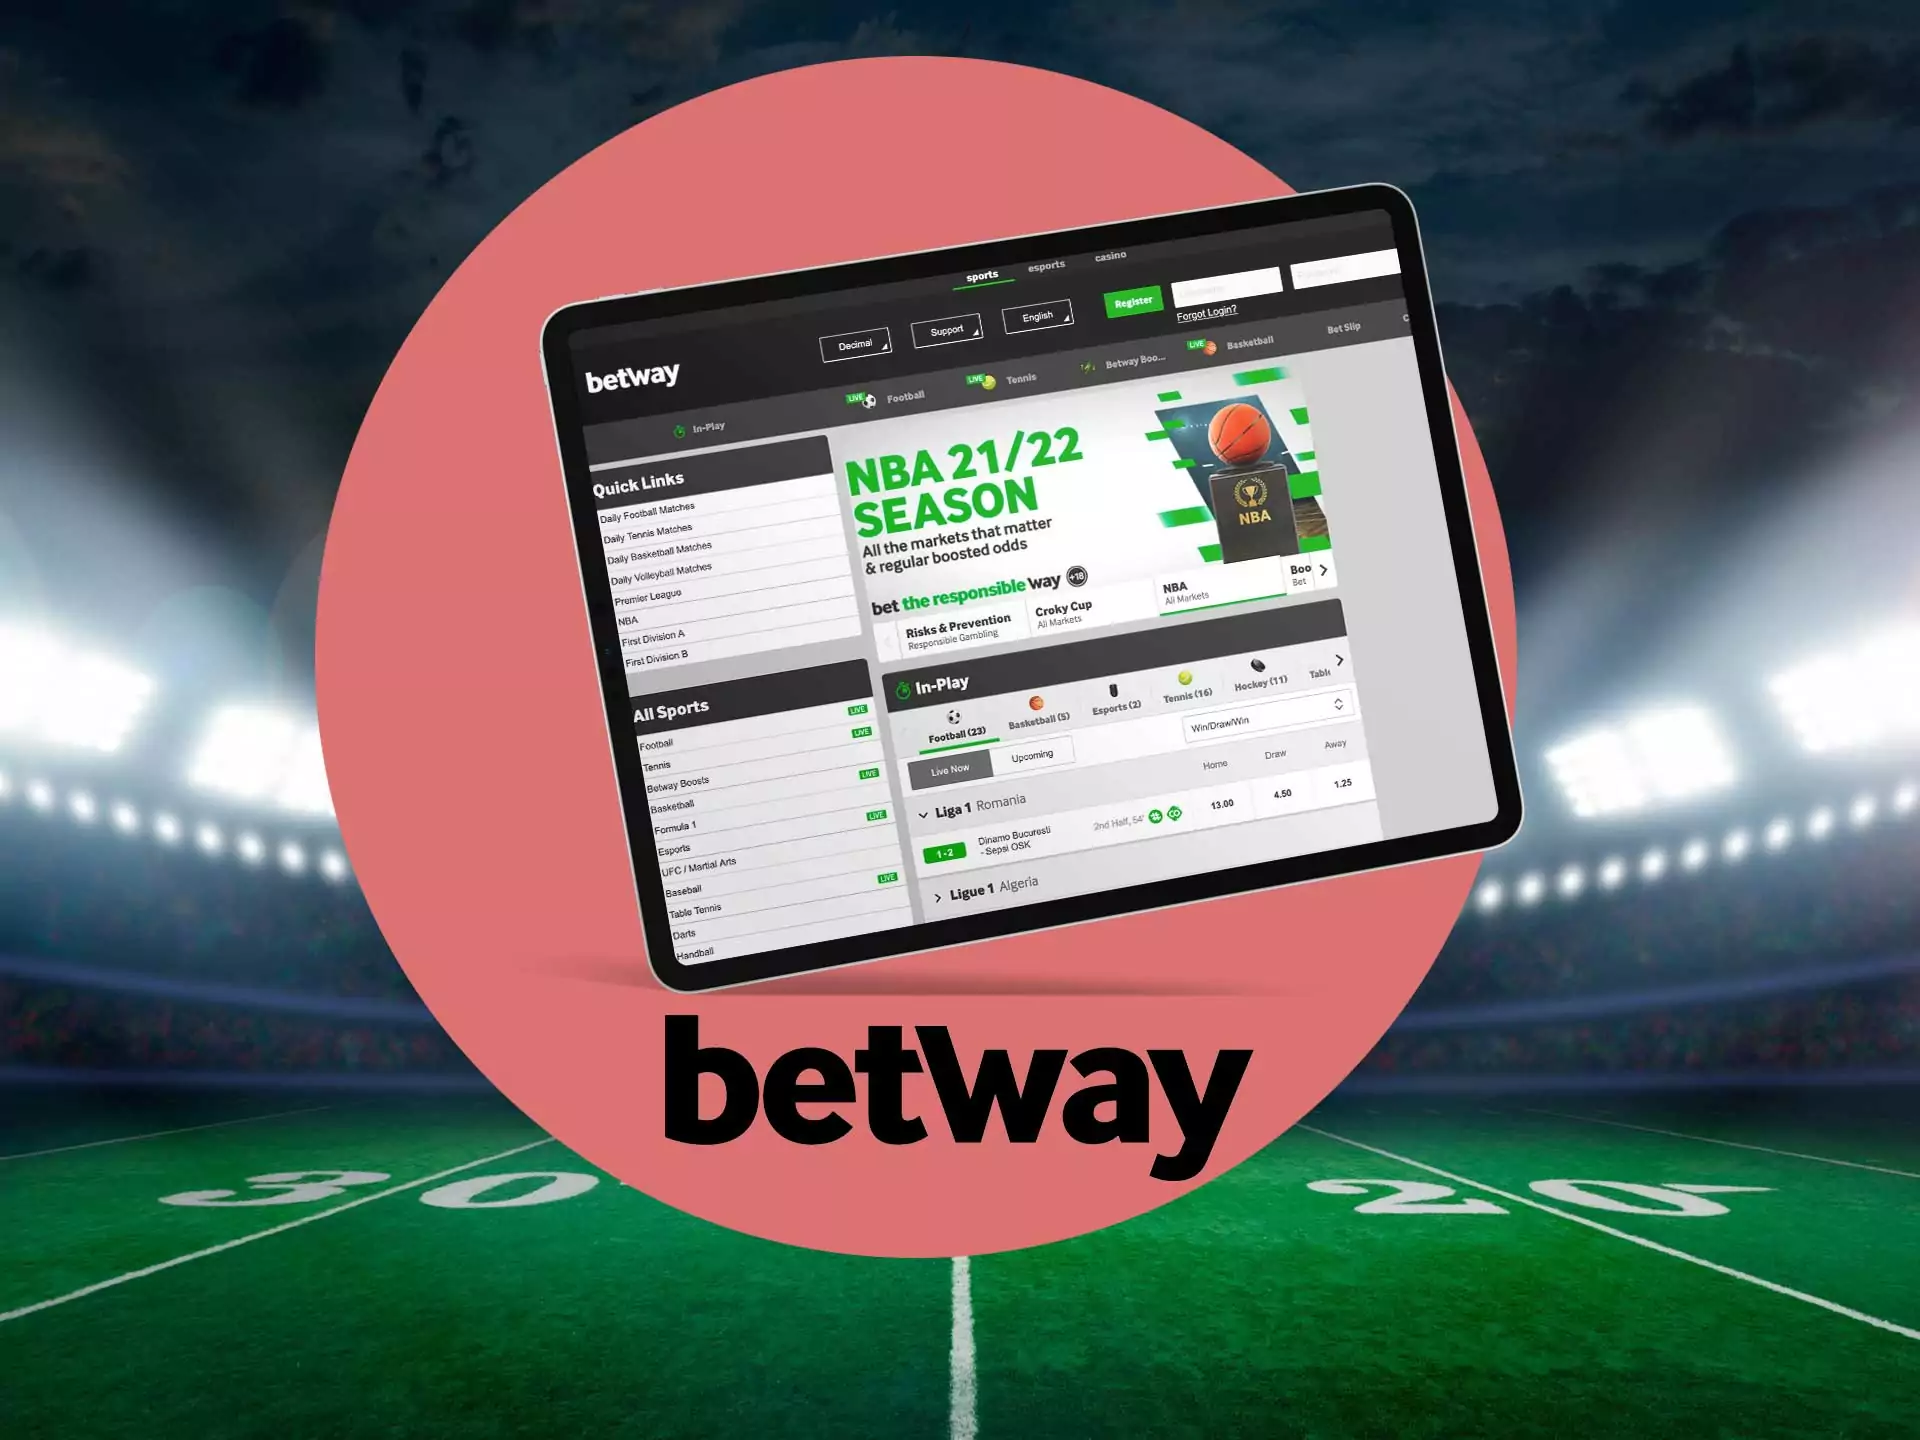 A betting app with a user-friendly website-like design.